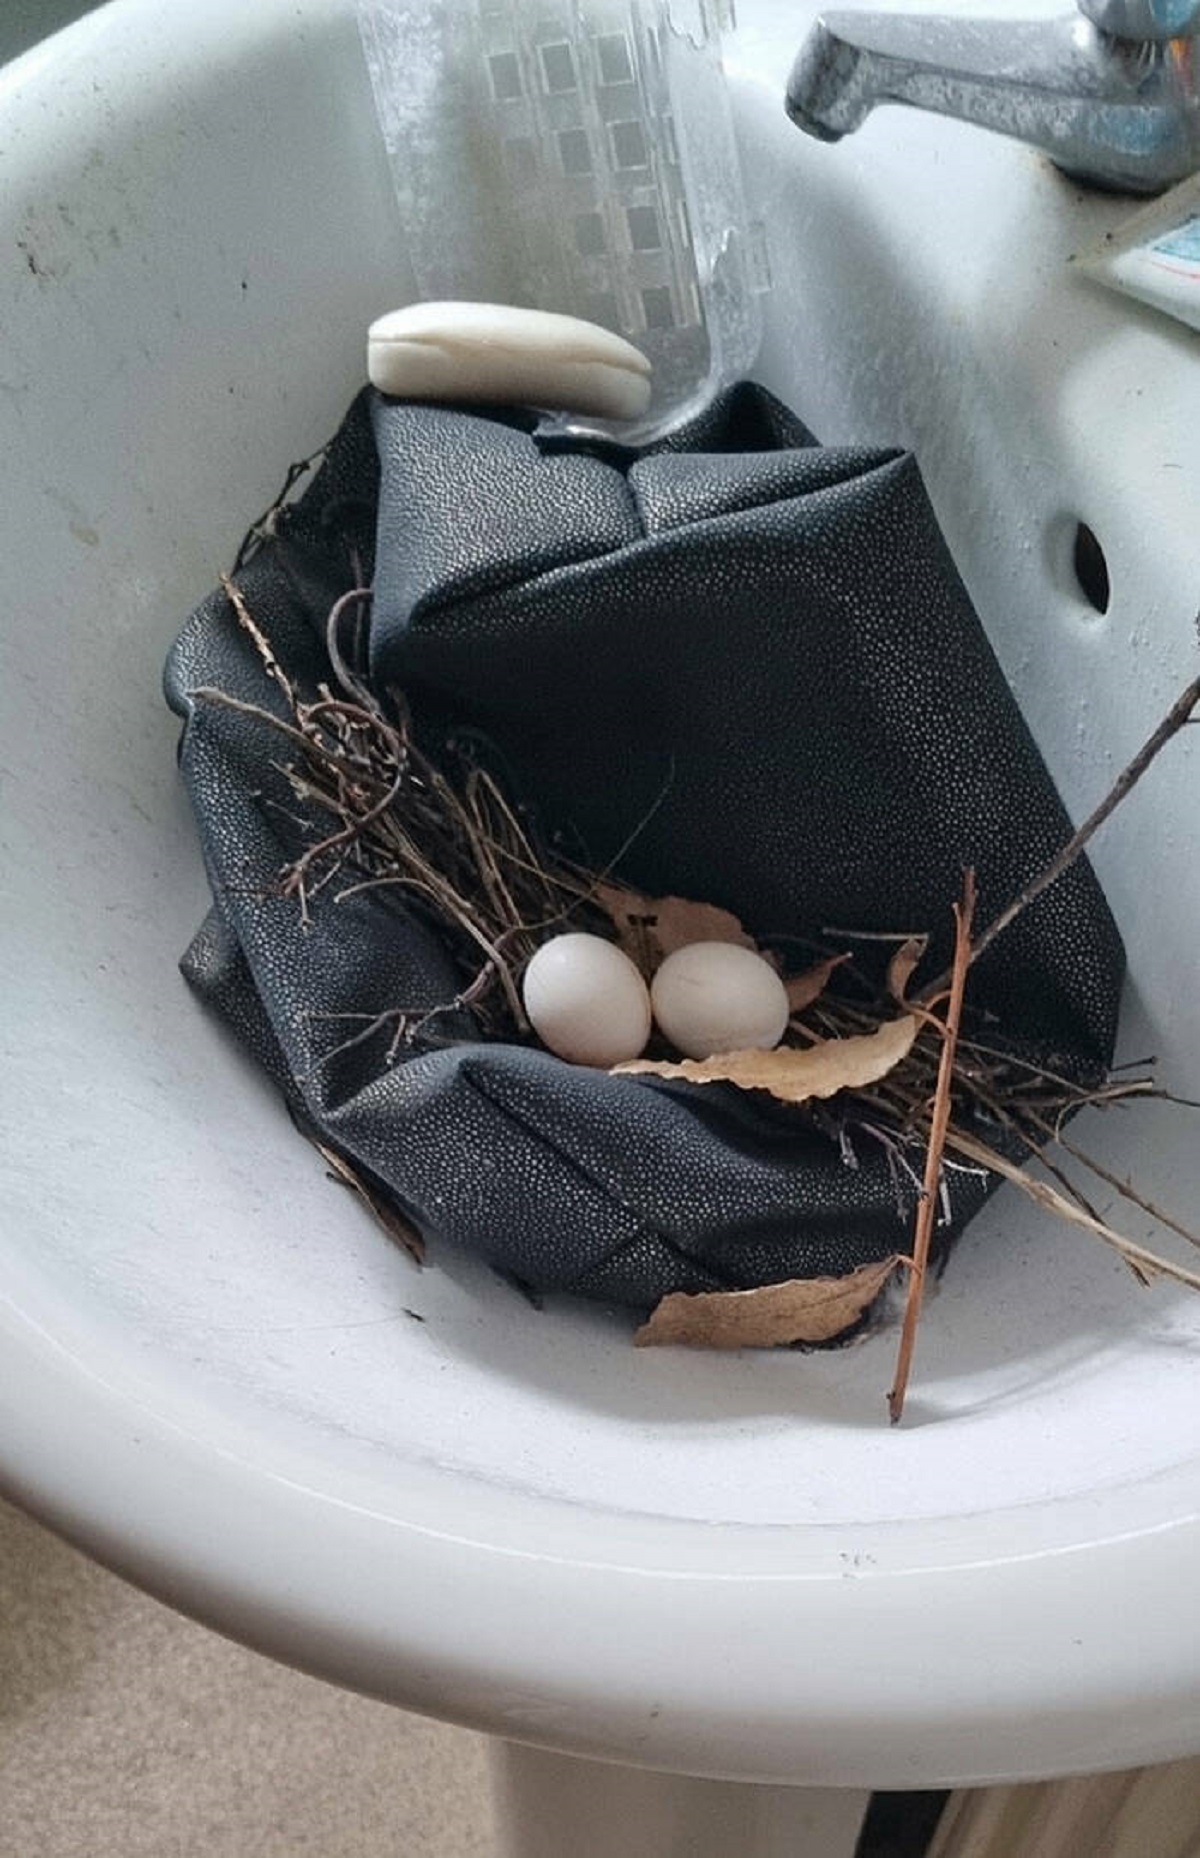 "While I Was Away, I Left My Bathroom Window Open For 3 Weeks, And A Bird Laid A Nest In My Sink"